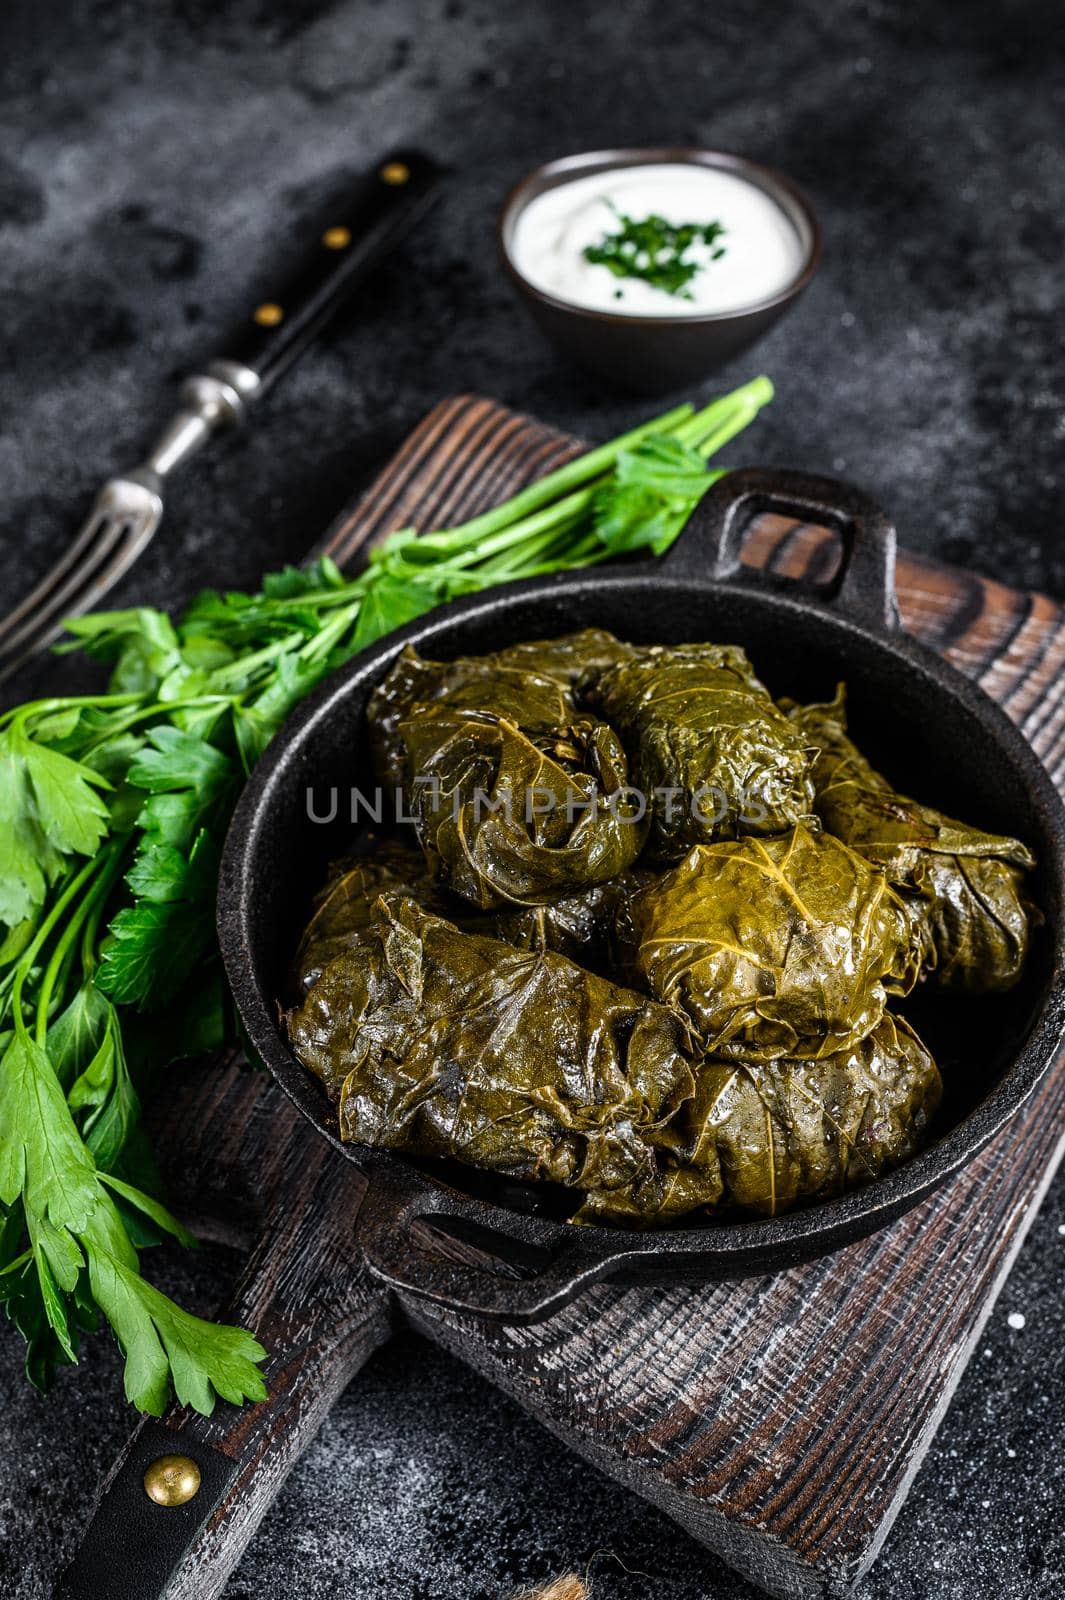 Dolma stuffed grape leaves with rice and meat. Black background. Top view.